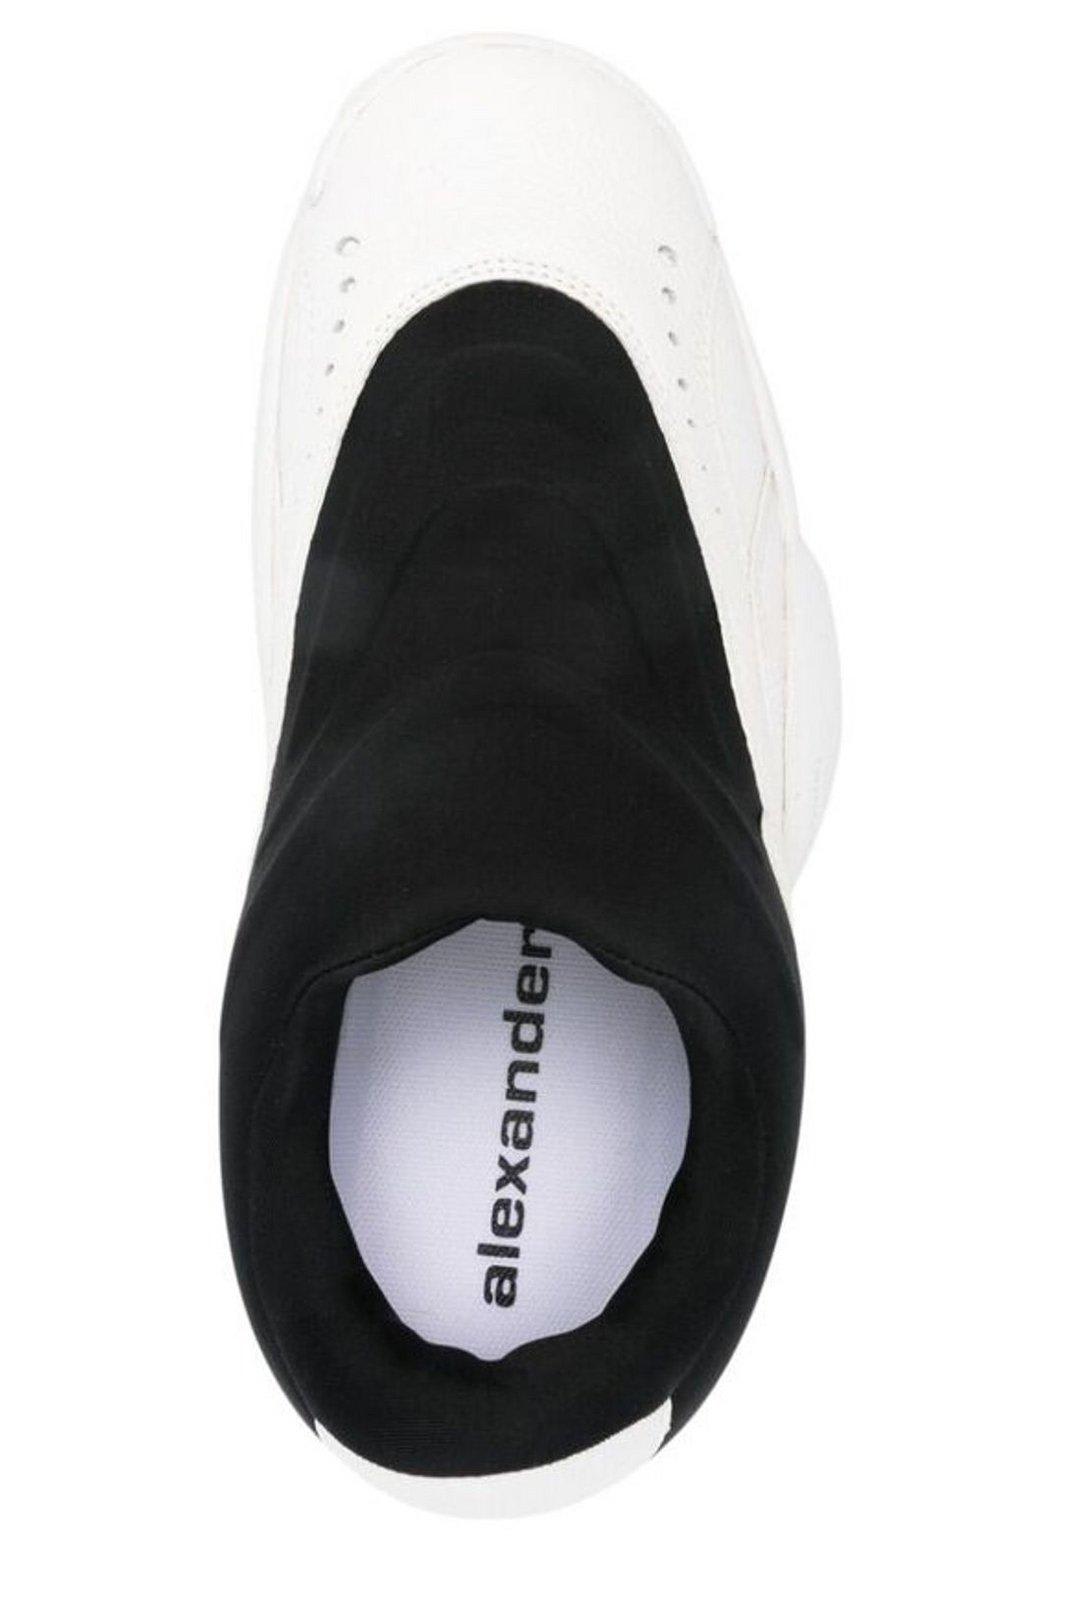 Shop Alexander Wang Lace-up Sneakers In Black/white